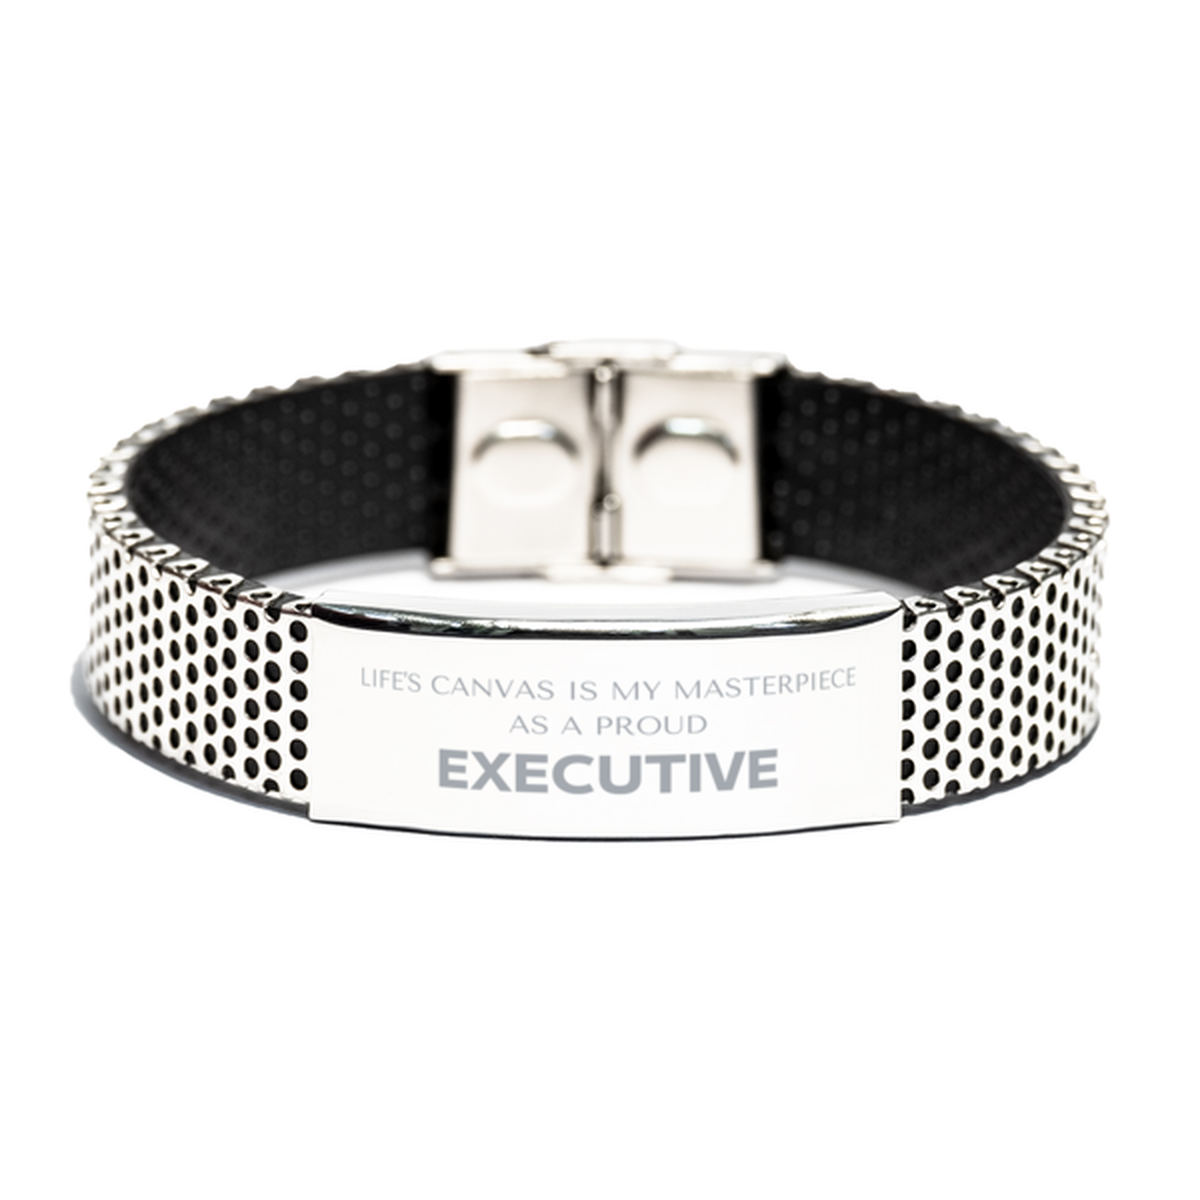 Proud Executive Gifts, Life's canvas is my masterpiece, Epic Birthday Christmas Unique Stainless Steel Bracelet For Executive, Coworkers, Men, Women, Friends